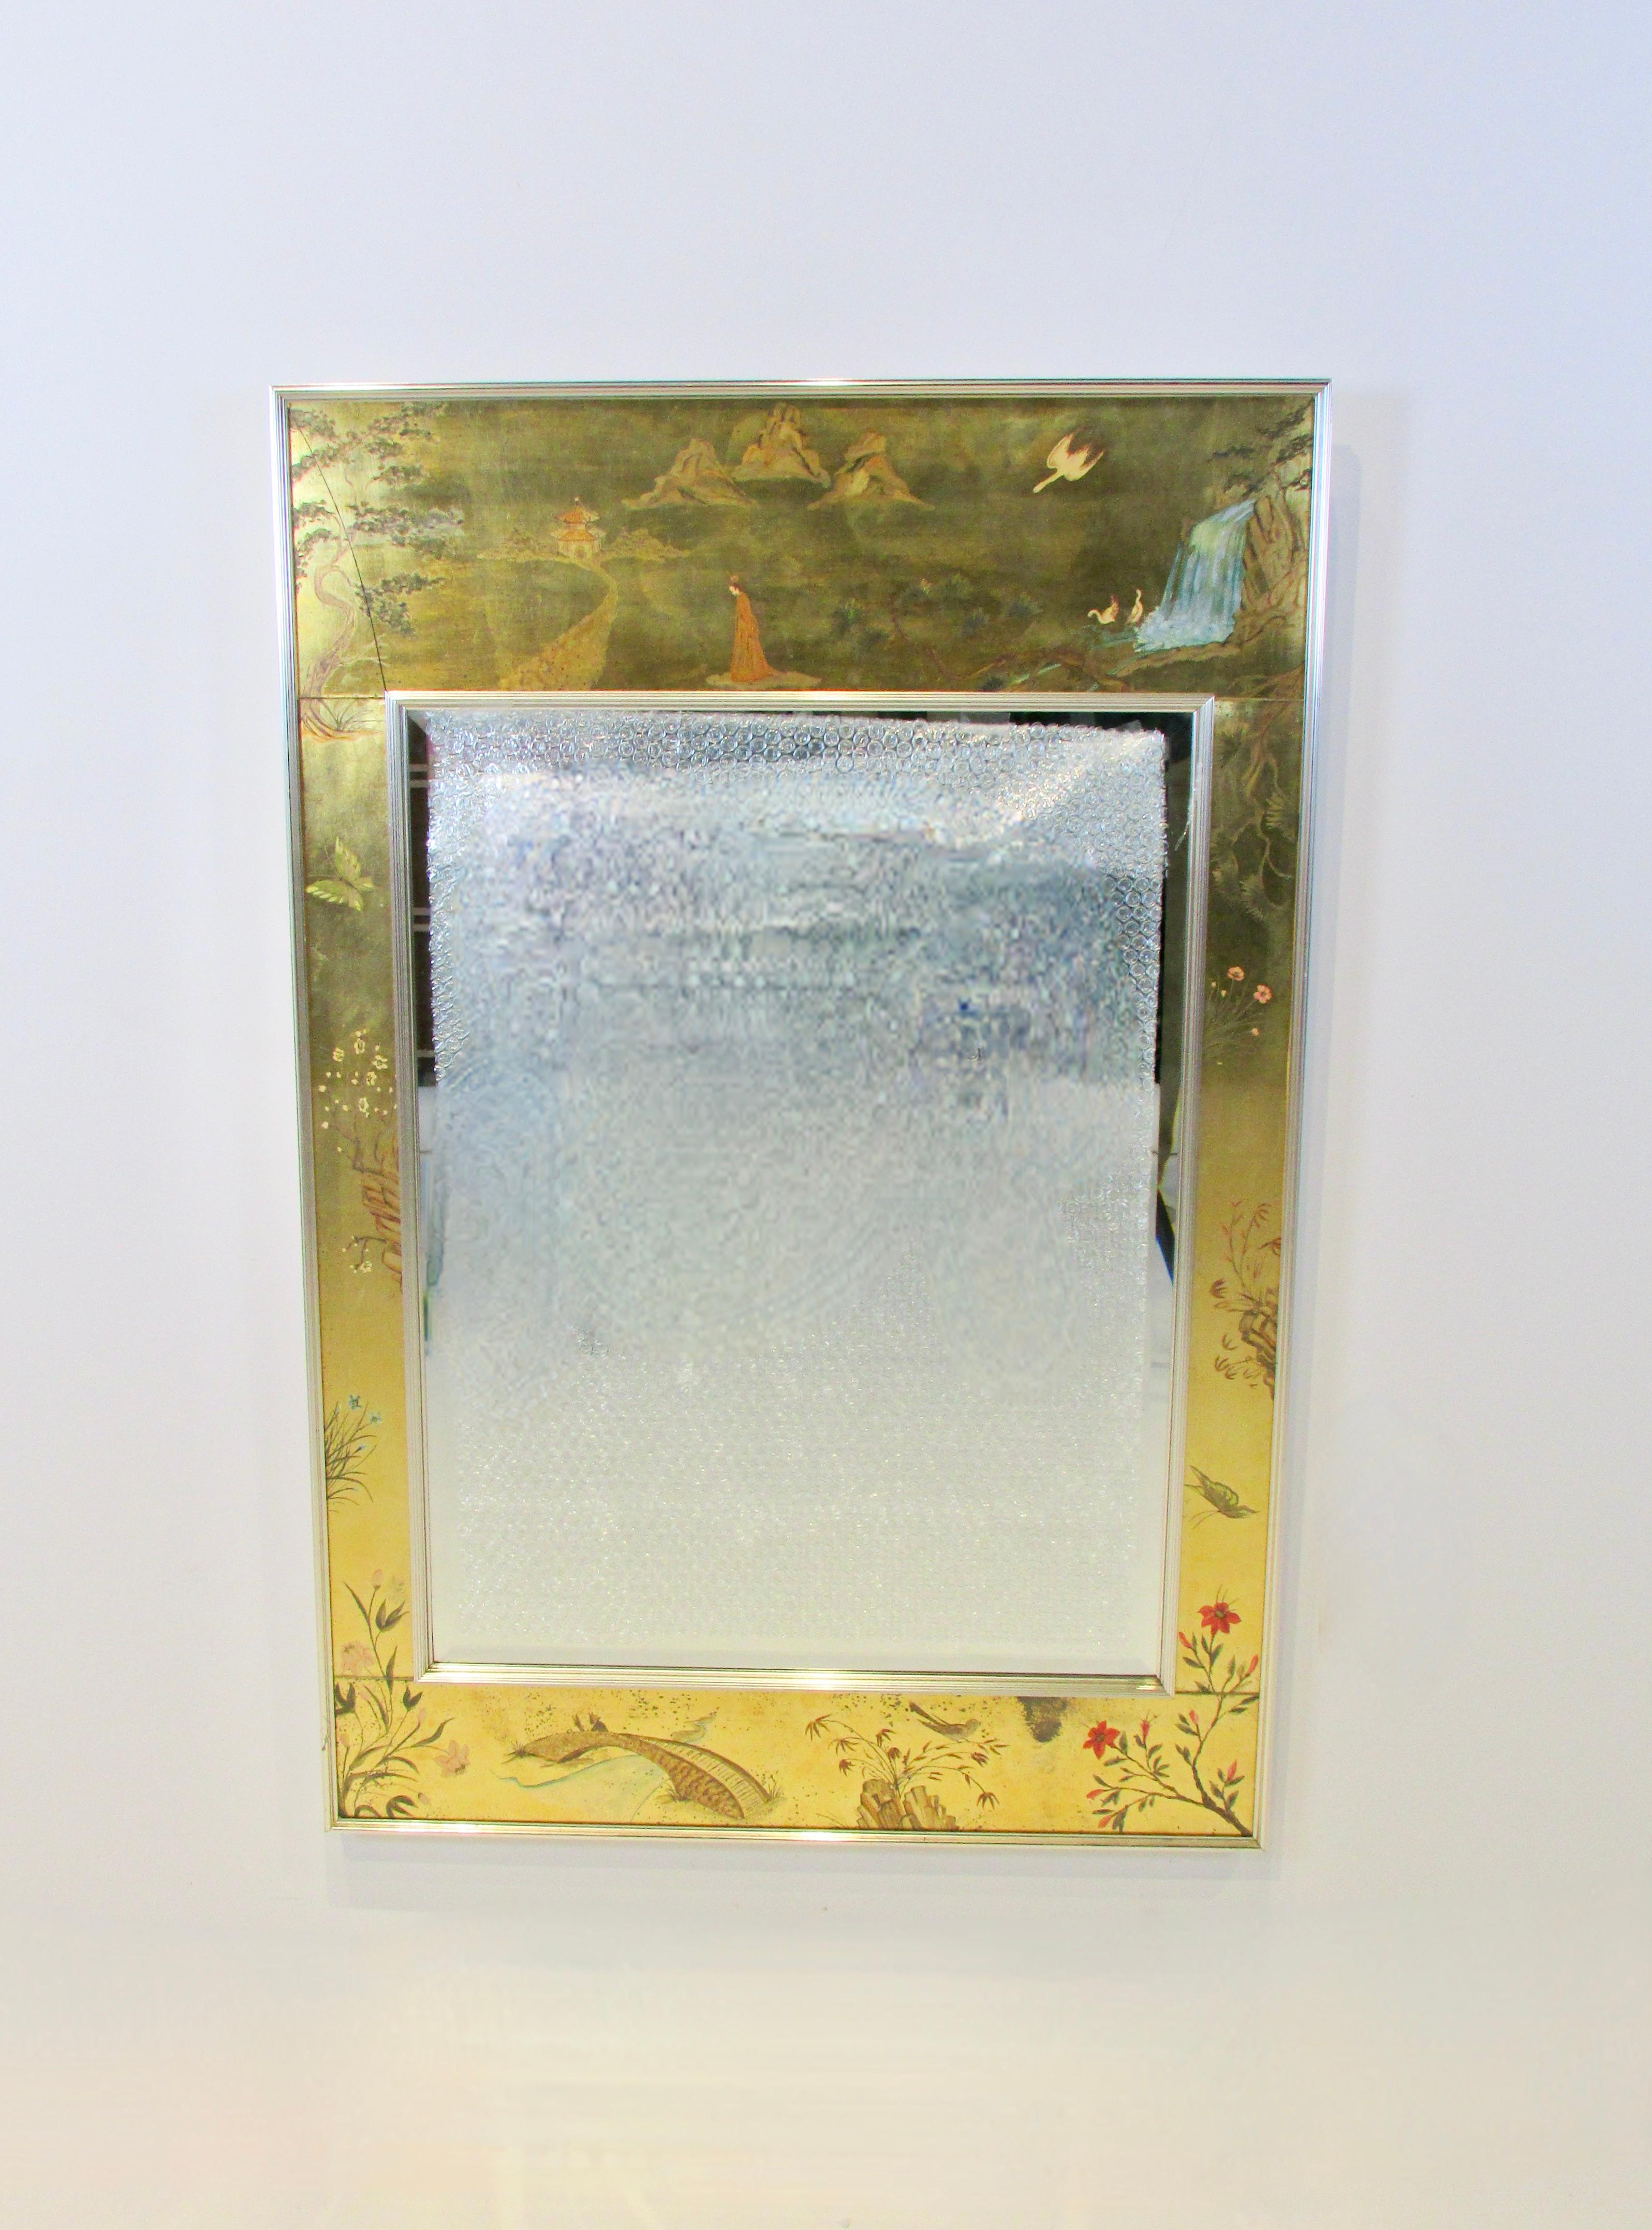 Wall mirror with Asian theme decoration on gold leaf surround . Bright vivid colors clear mirror . There is a crack in the gold leaf upper left corner behind the outer glass .